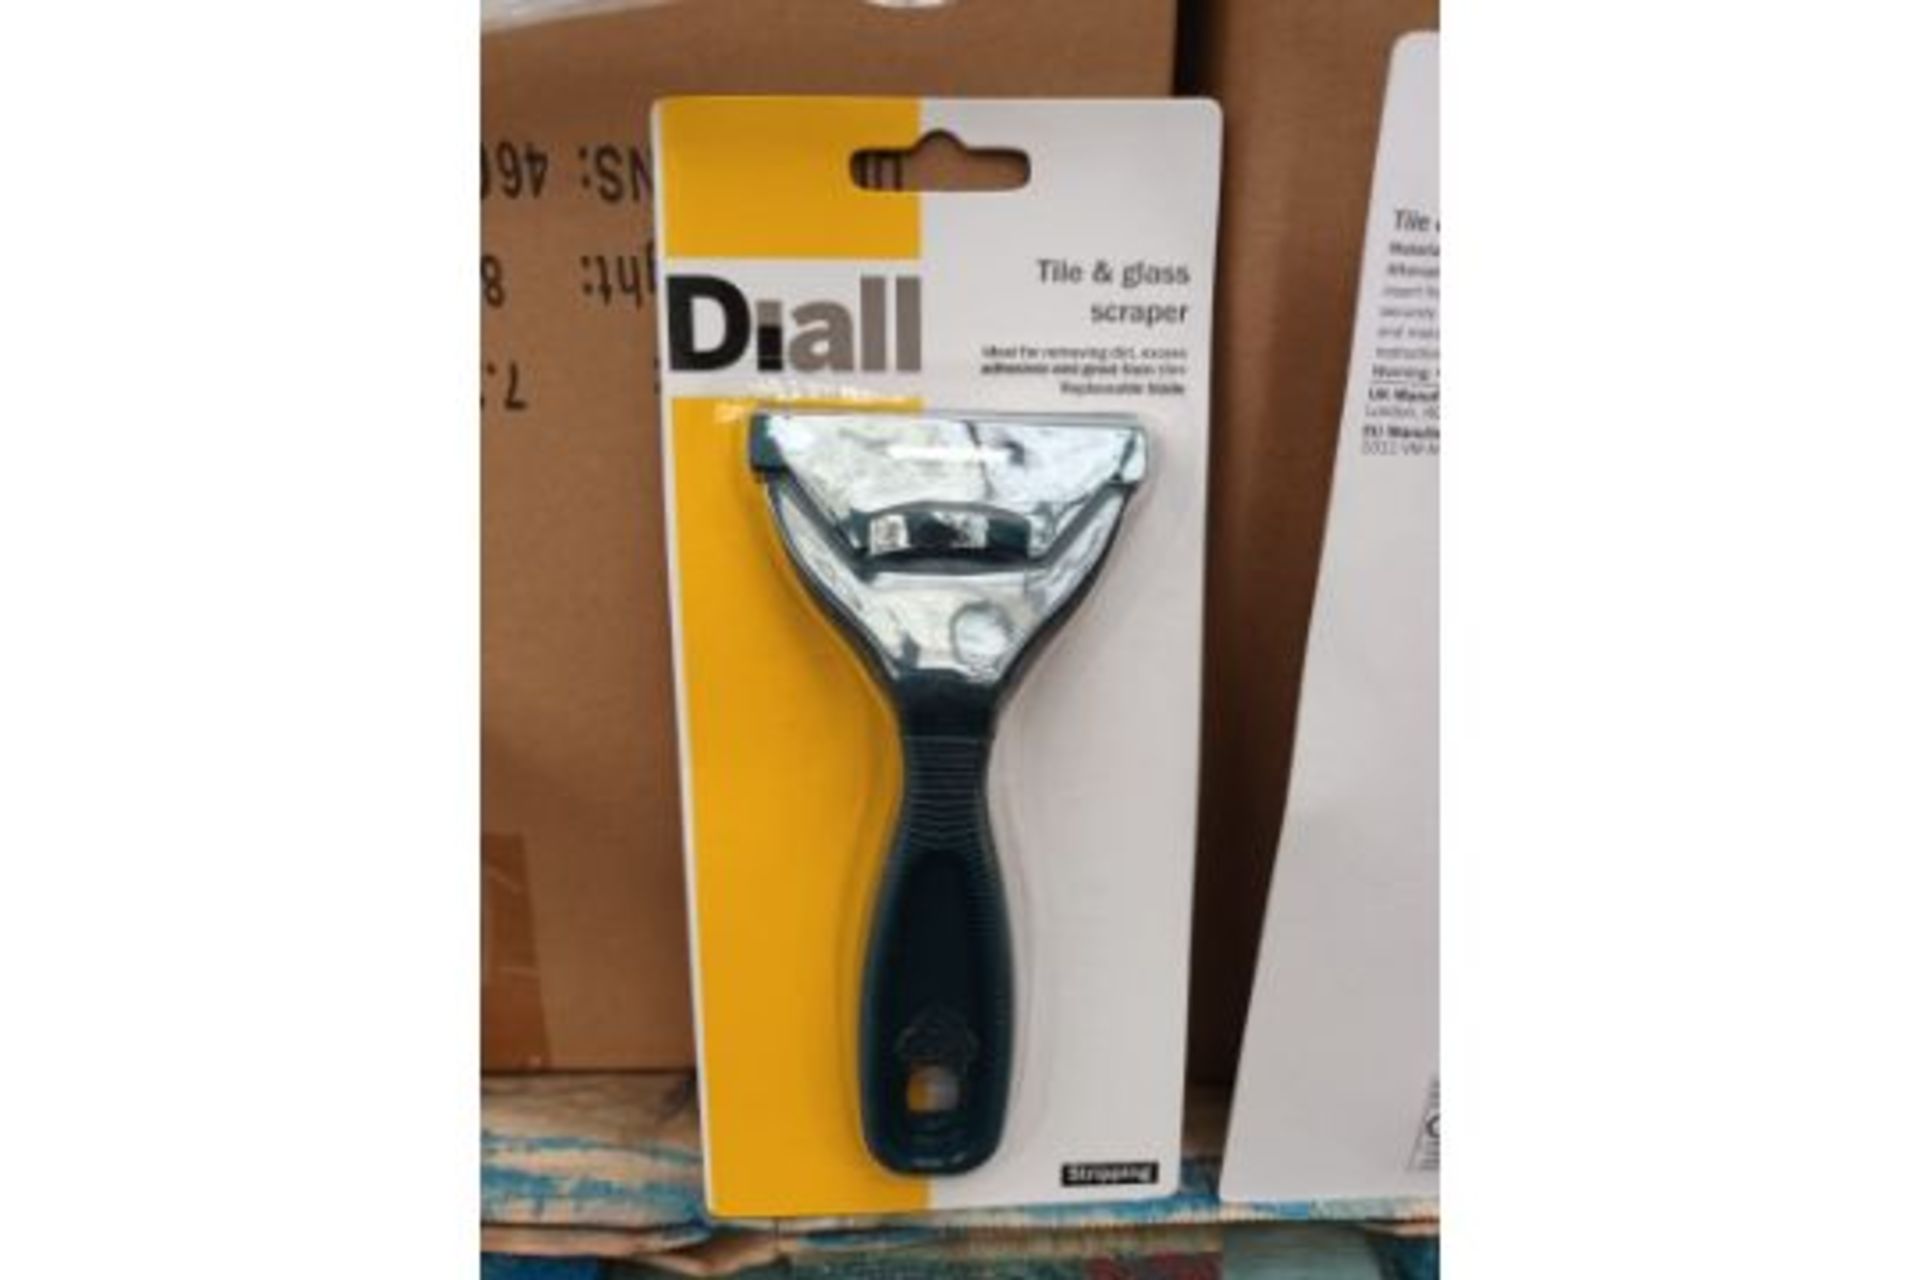 72 X NEW PACKAGED DIALL TILE & GLASS SCRAPERS WITH BLADE. IDEAL FOR REMOVING DIRT, EXCESS